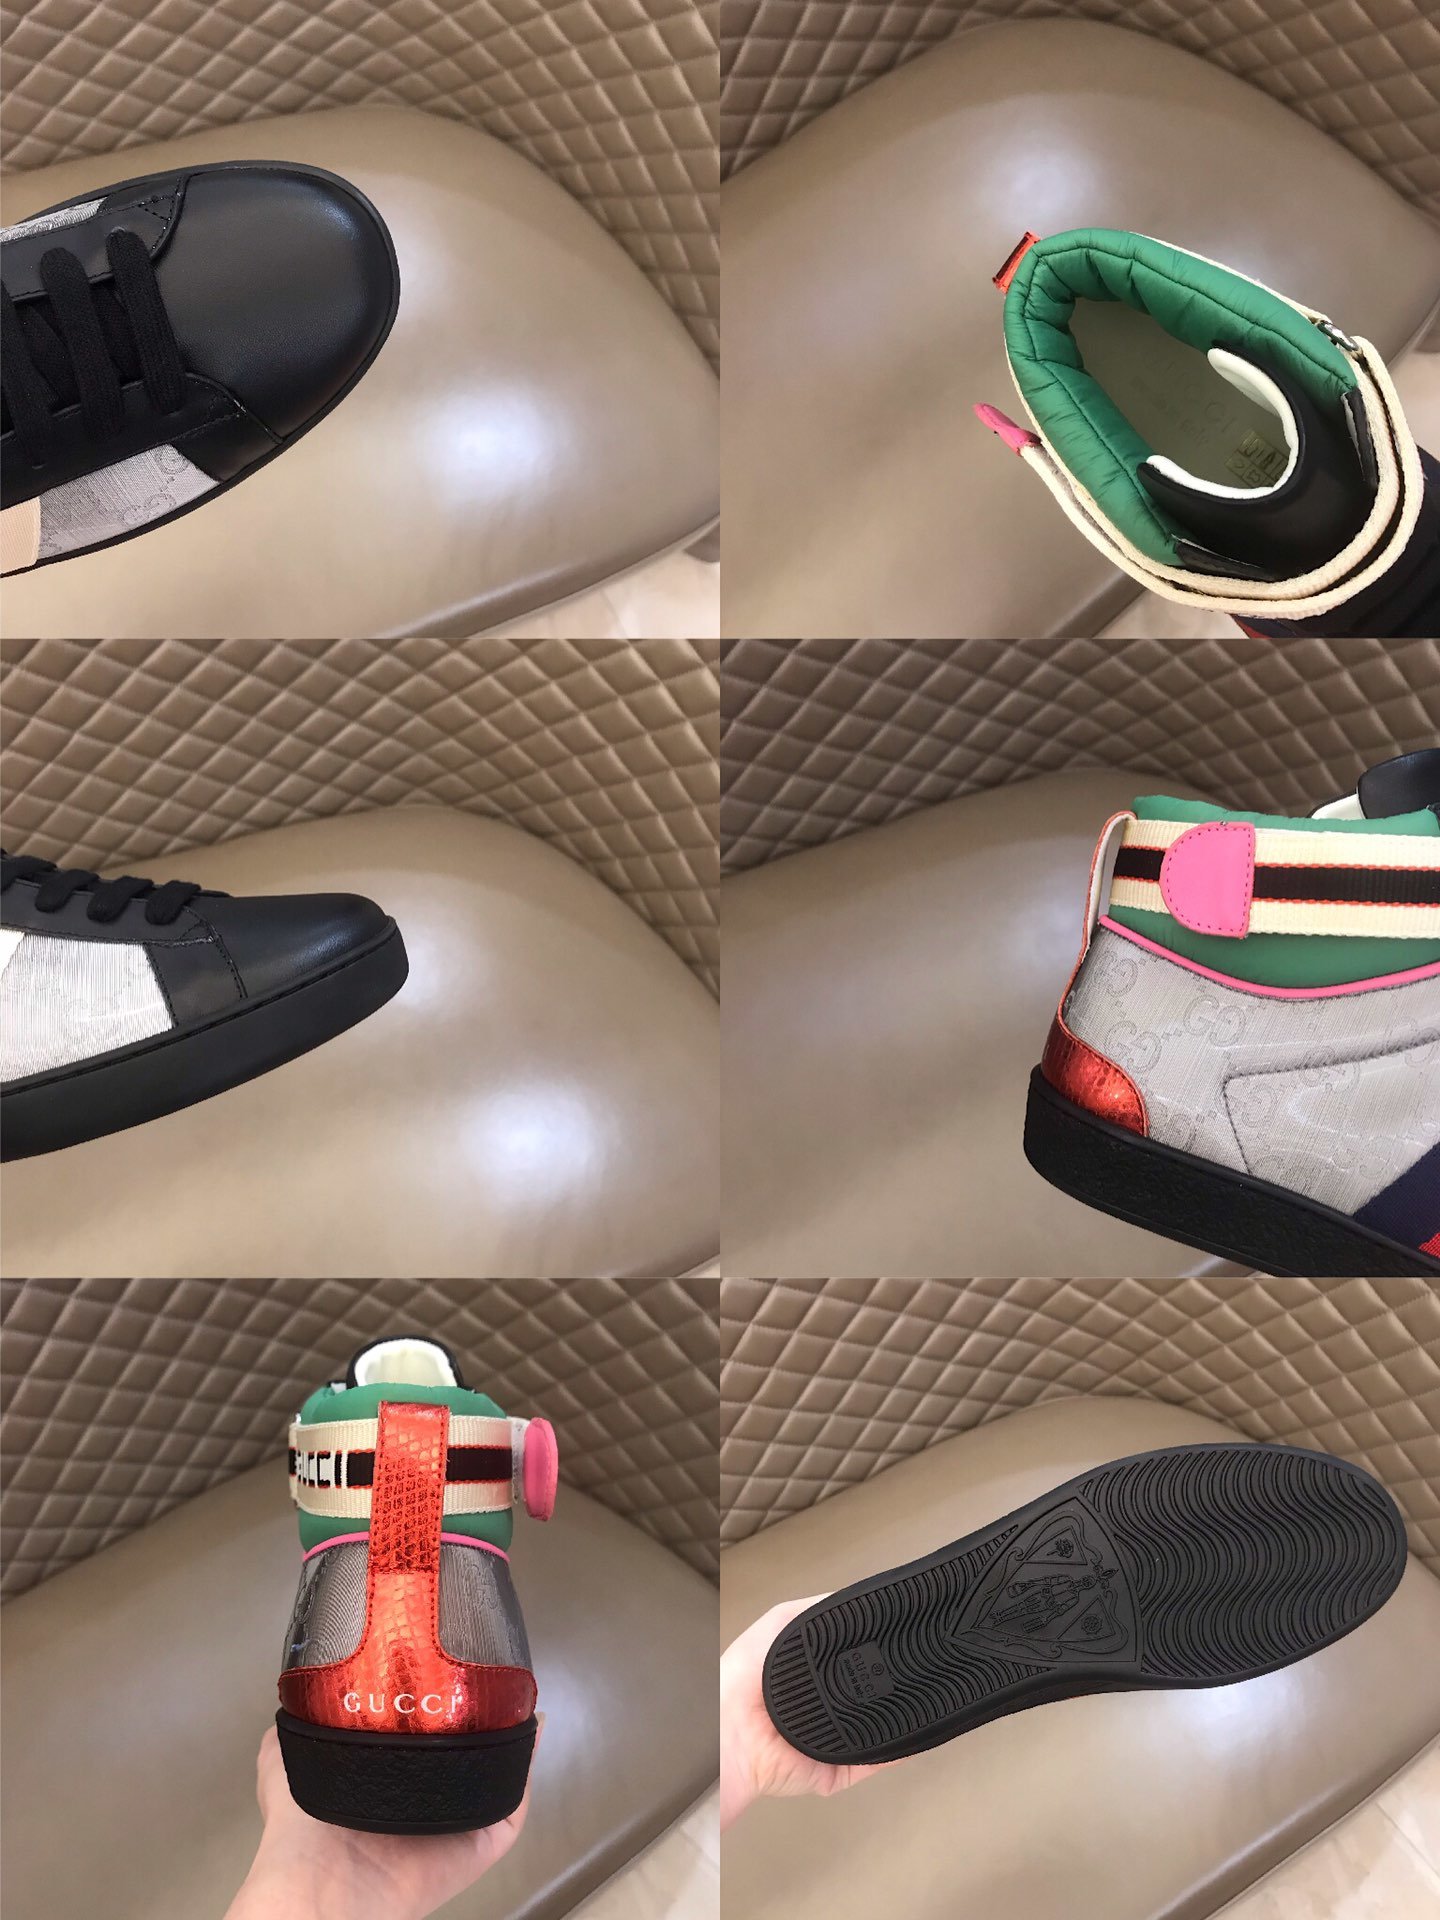 Gucci High-top High Quality Sneakers Silver and green details and black sole MS021159